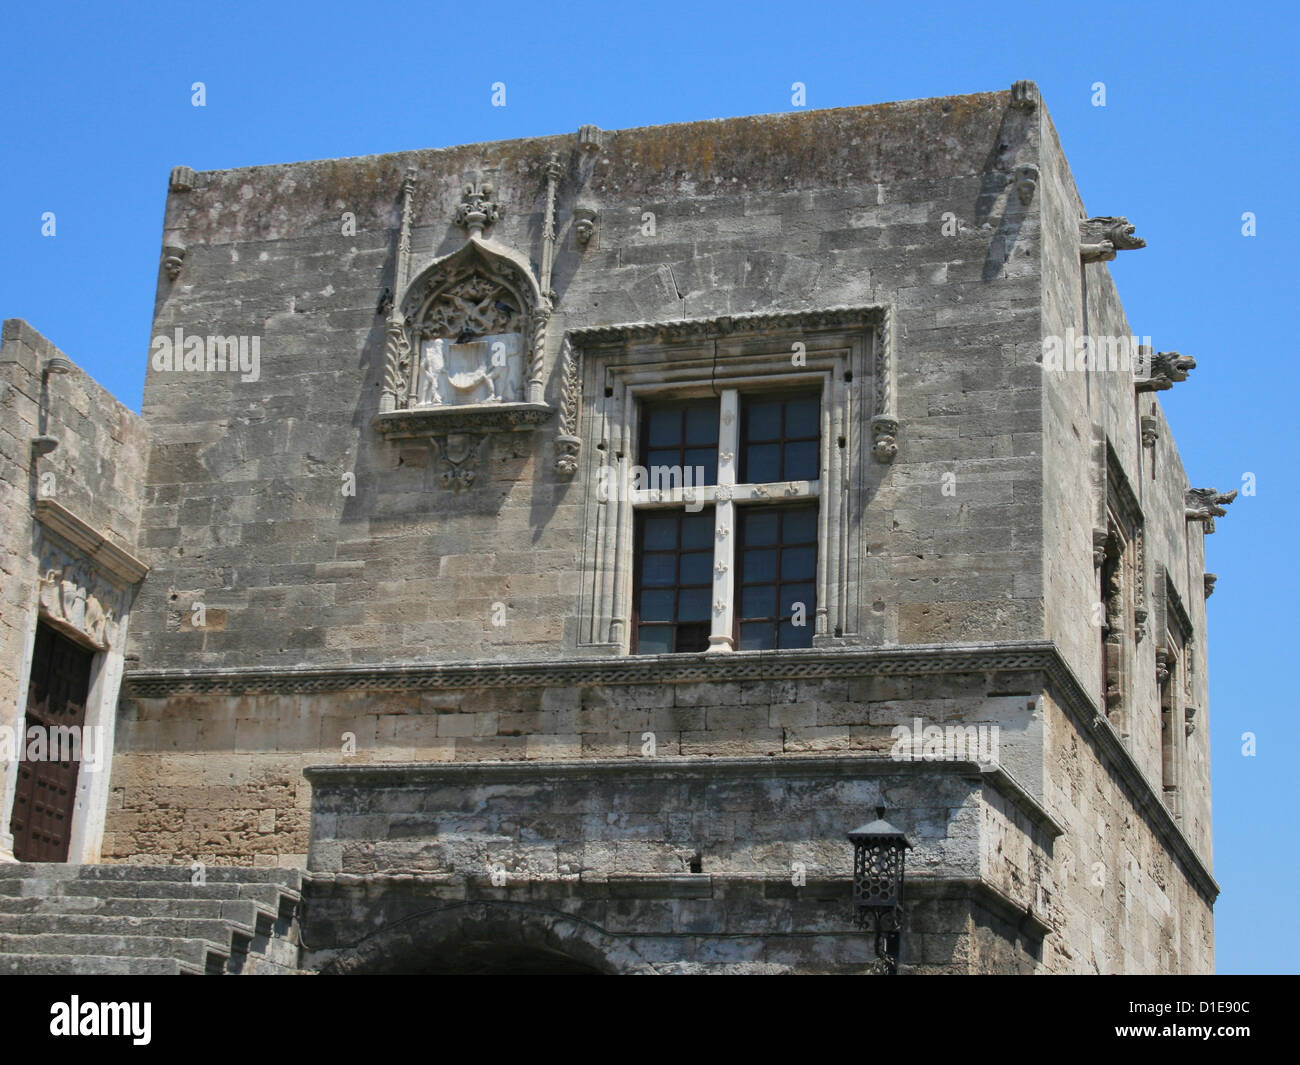 Castellania building (trade court) on Hyppoctratus square. Rhodes old town, Greece. Stock Photo